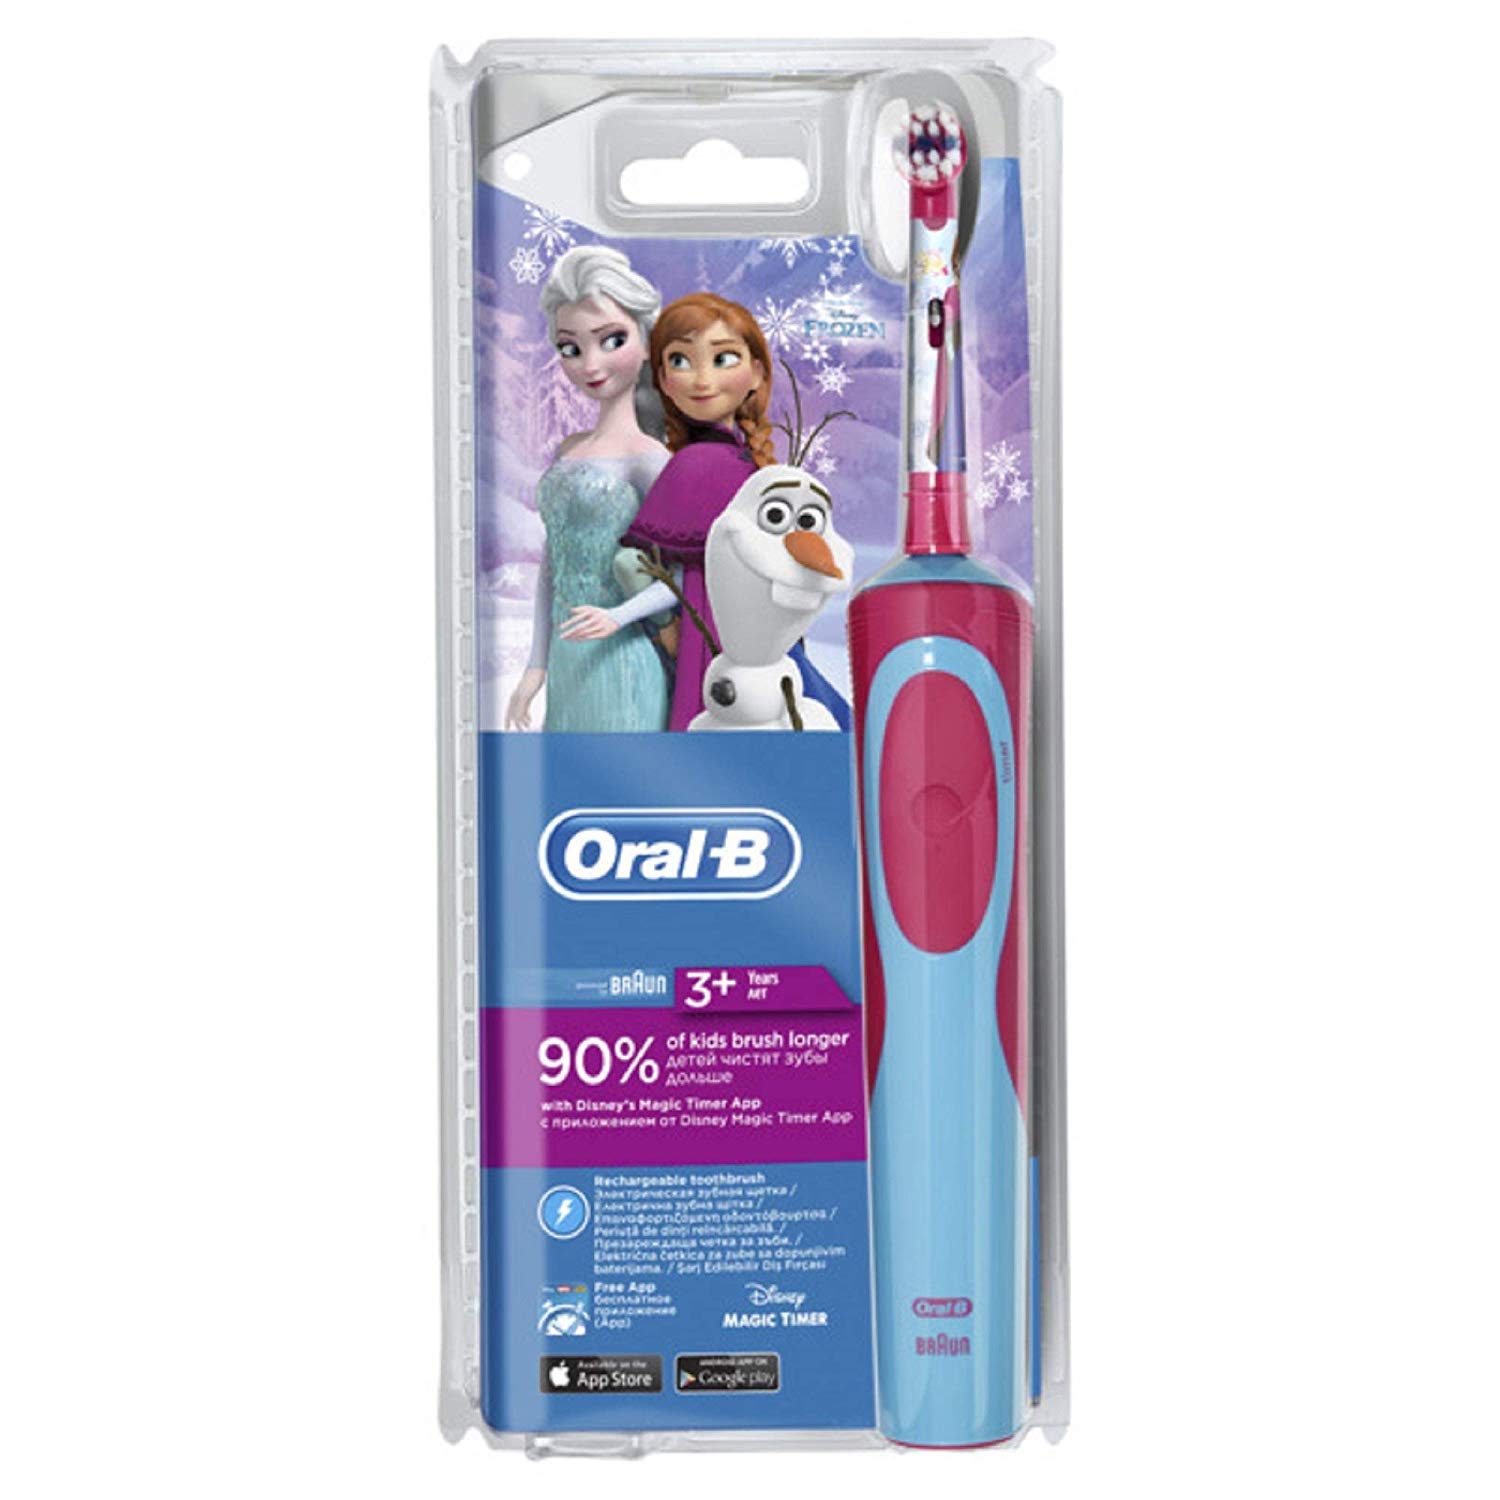 Oral-B Kids Electric Rechargeable Toothbrush Featuring Frozen Characters